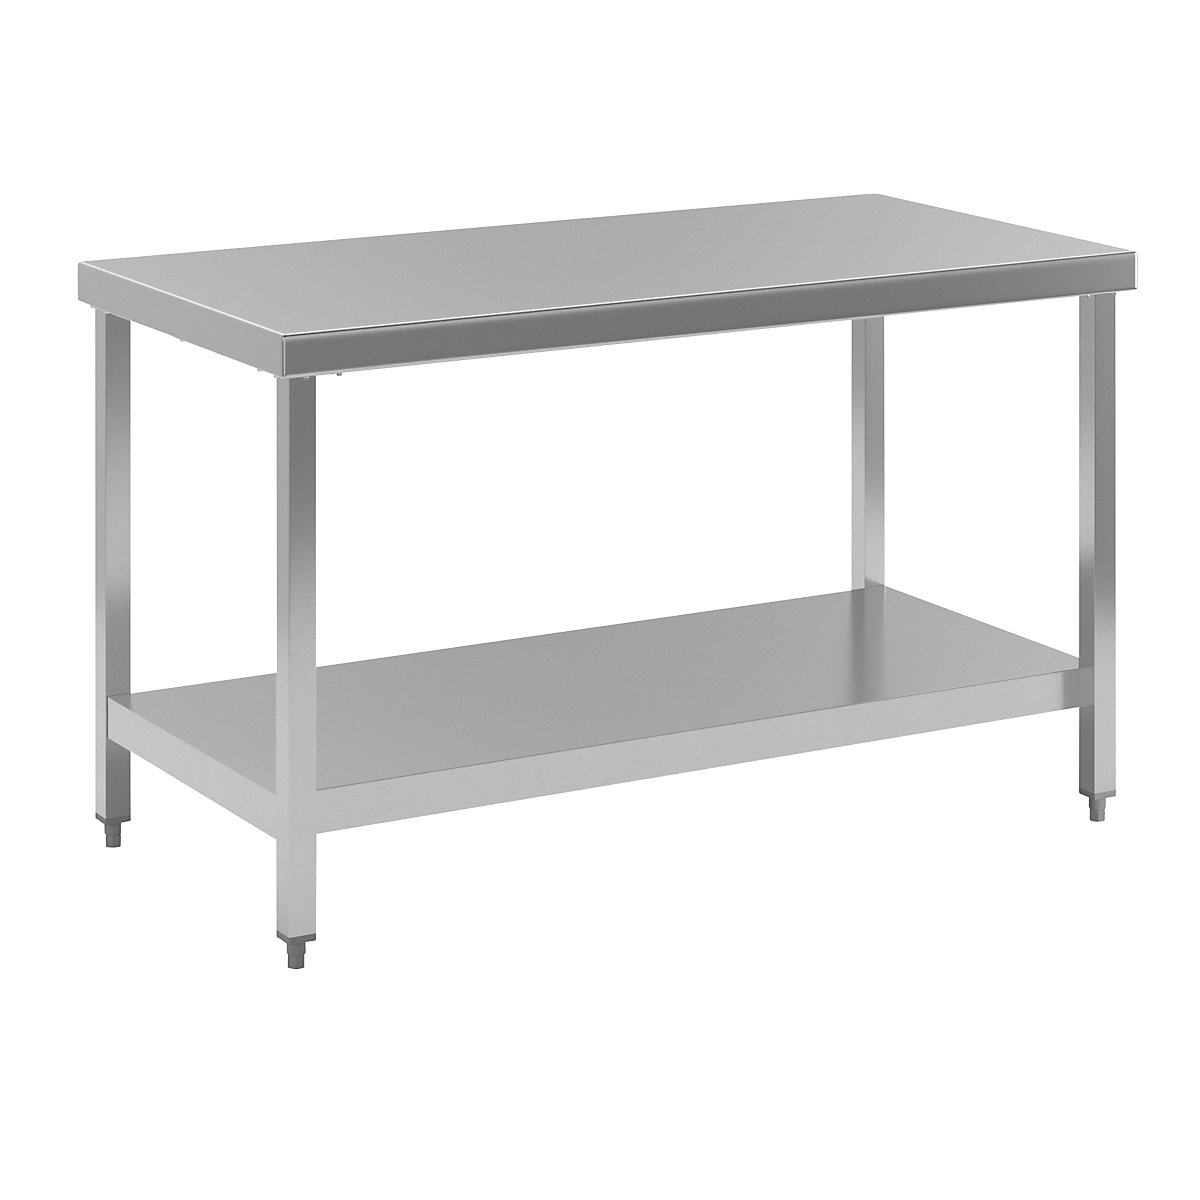 Stainless steel workbench, working height 850 mm, WxD 1400 x 700 mm, with shelf-10